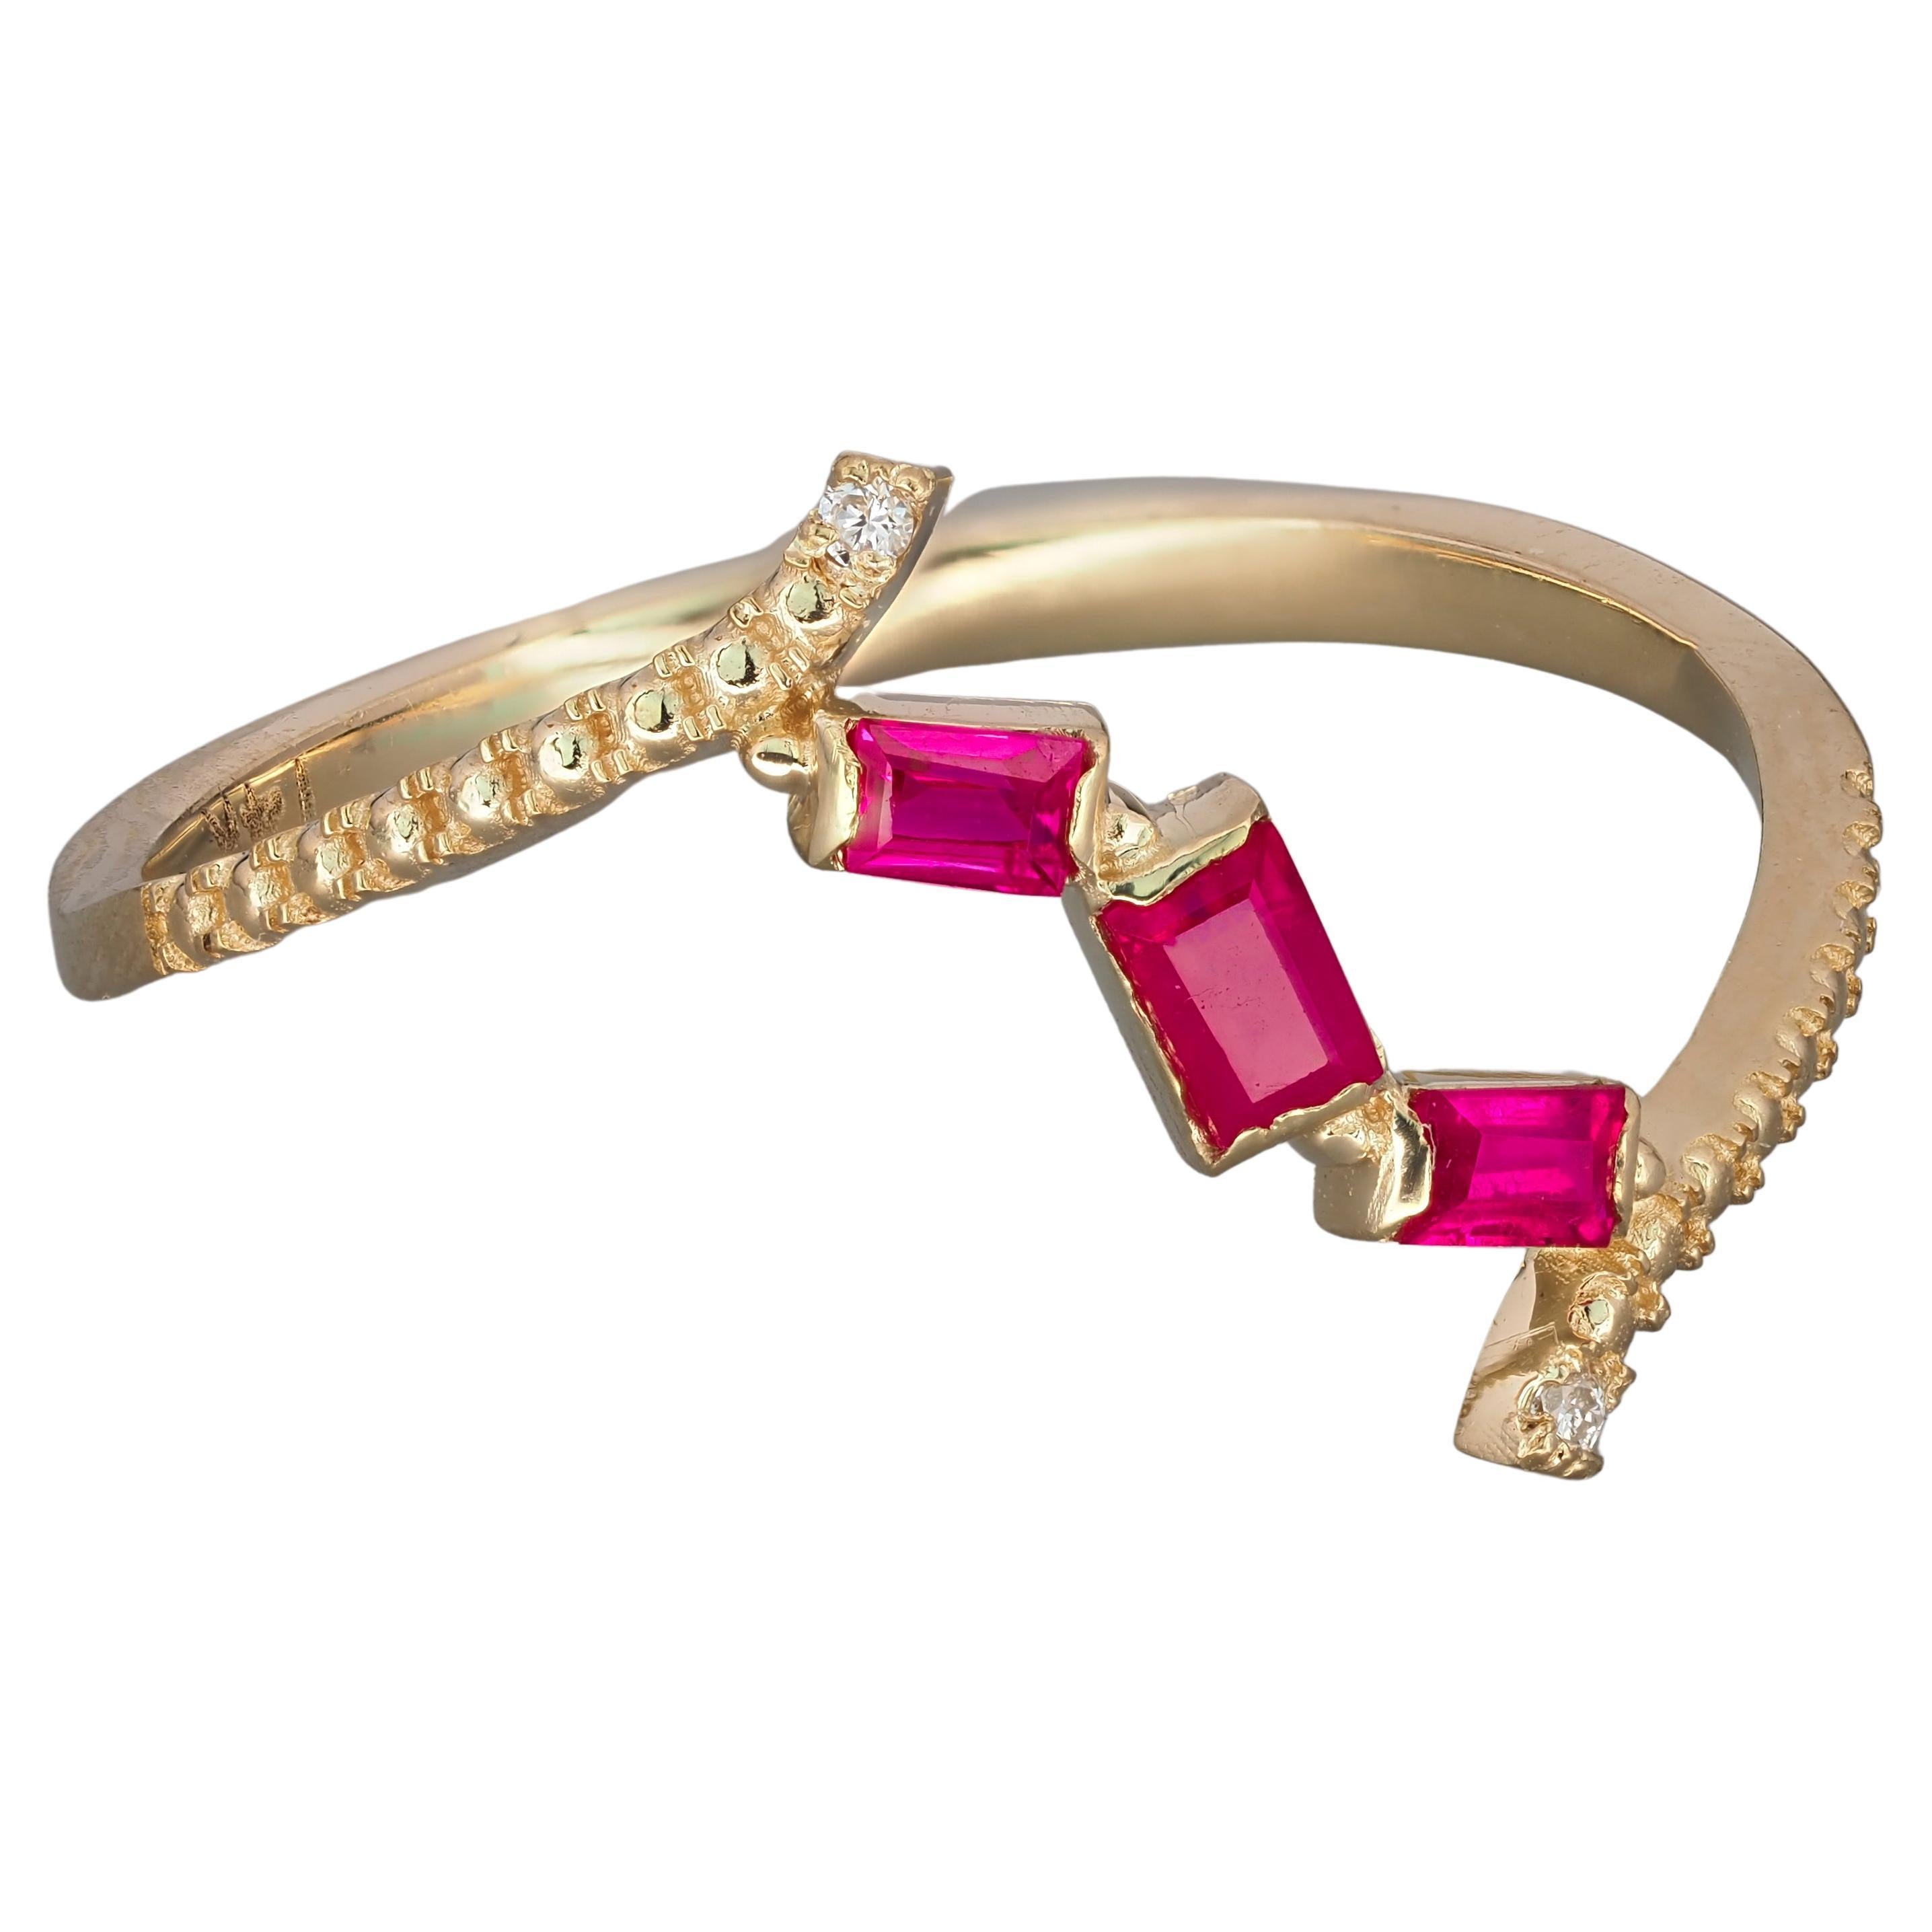 For Sale:  14k Gold Ring with Rubies and Diamonds. Baguette ruby ring.